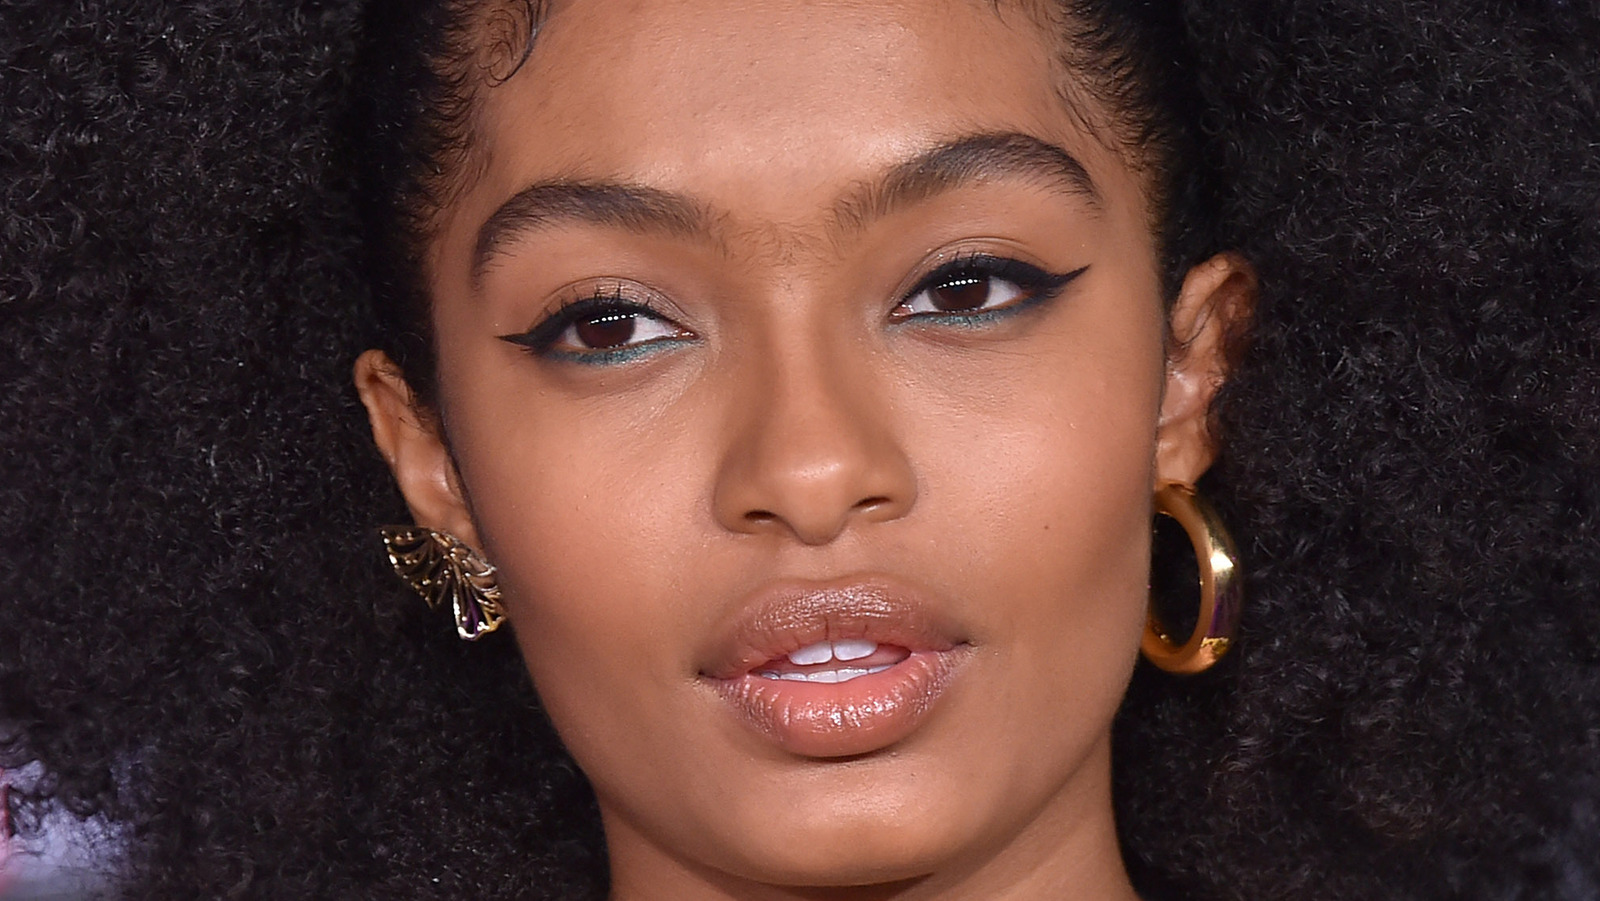 YARA SHAHIDI HAS HER NOSE IN ALL THE RIGHT PLACES – Janet